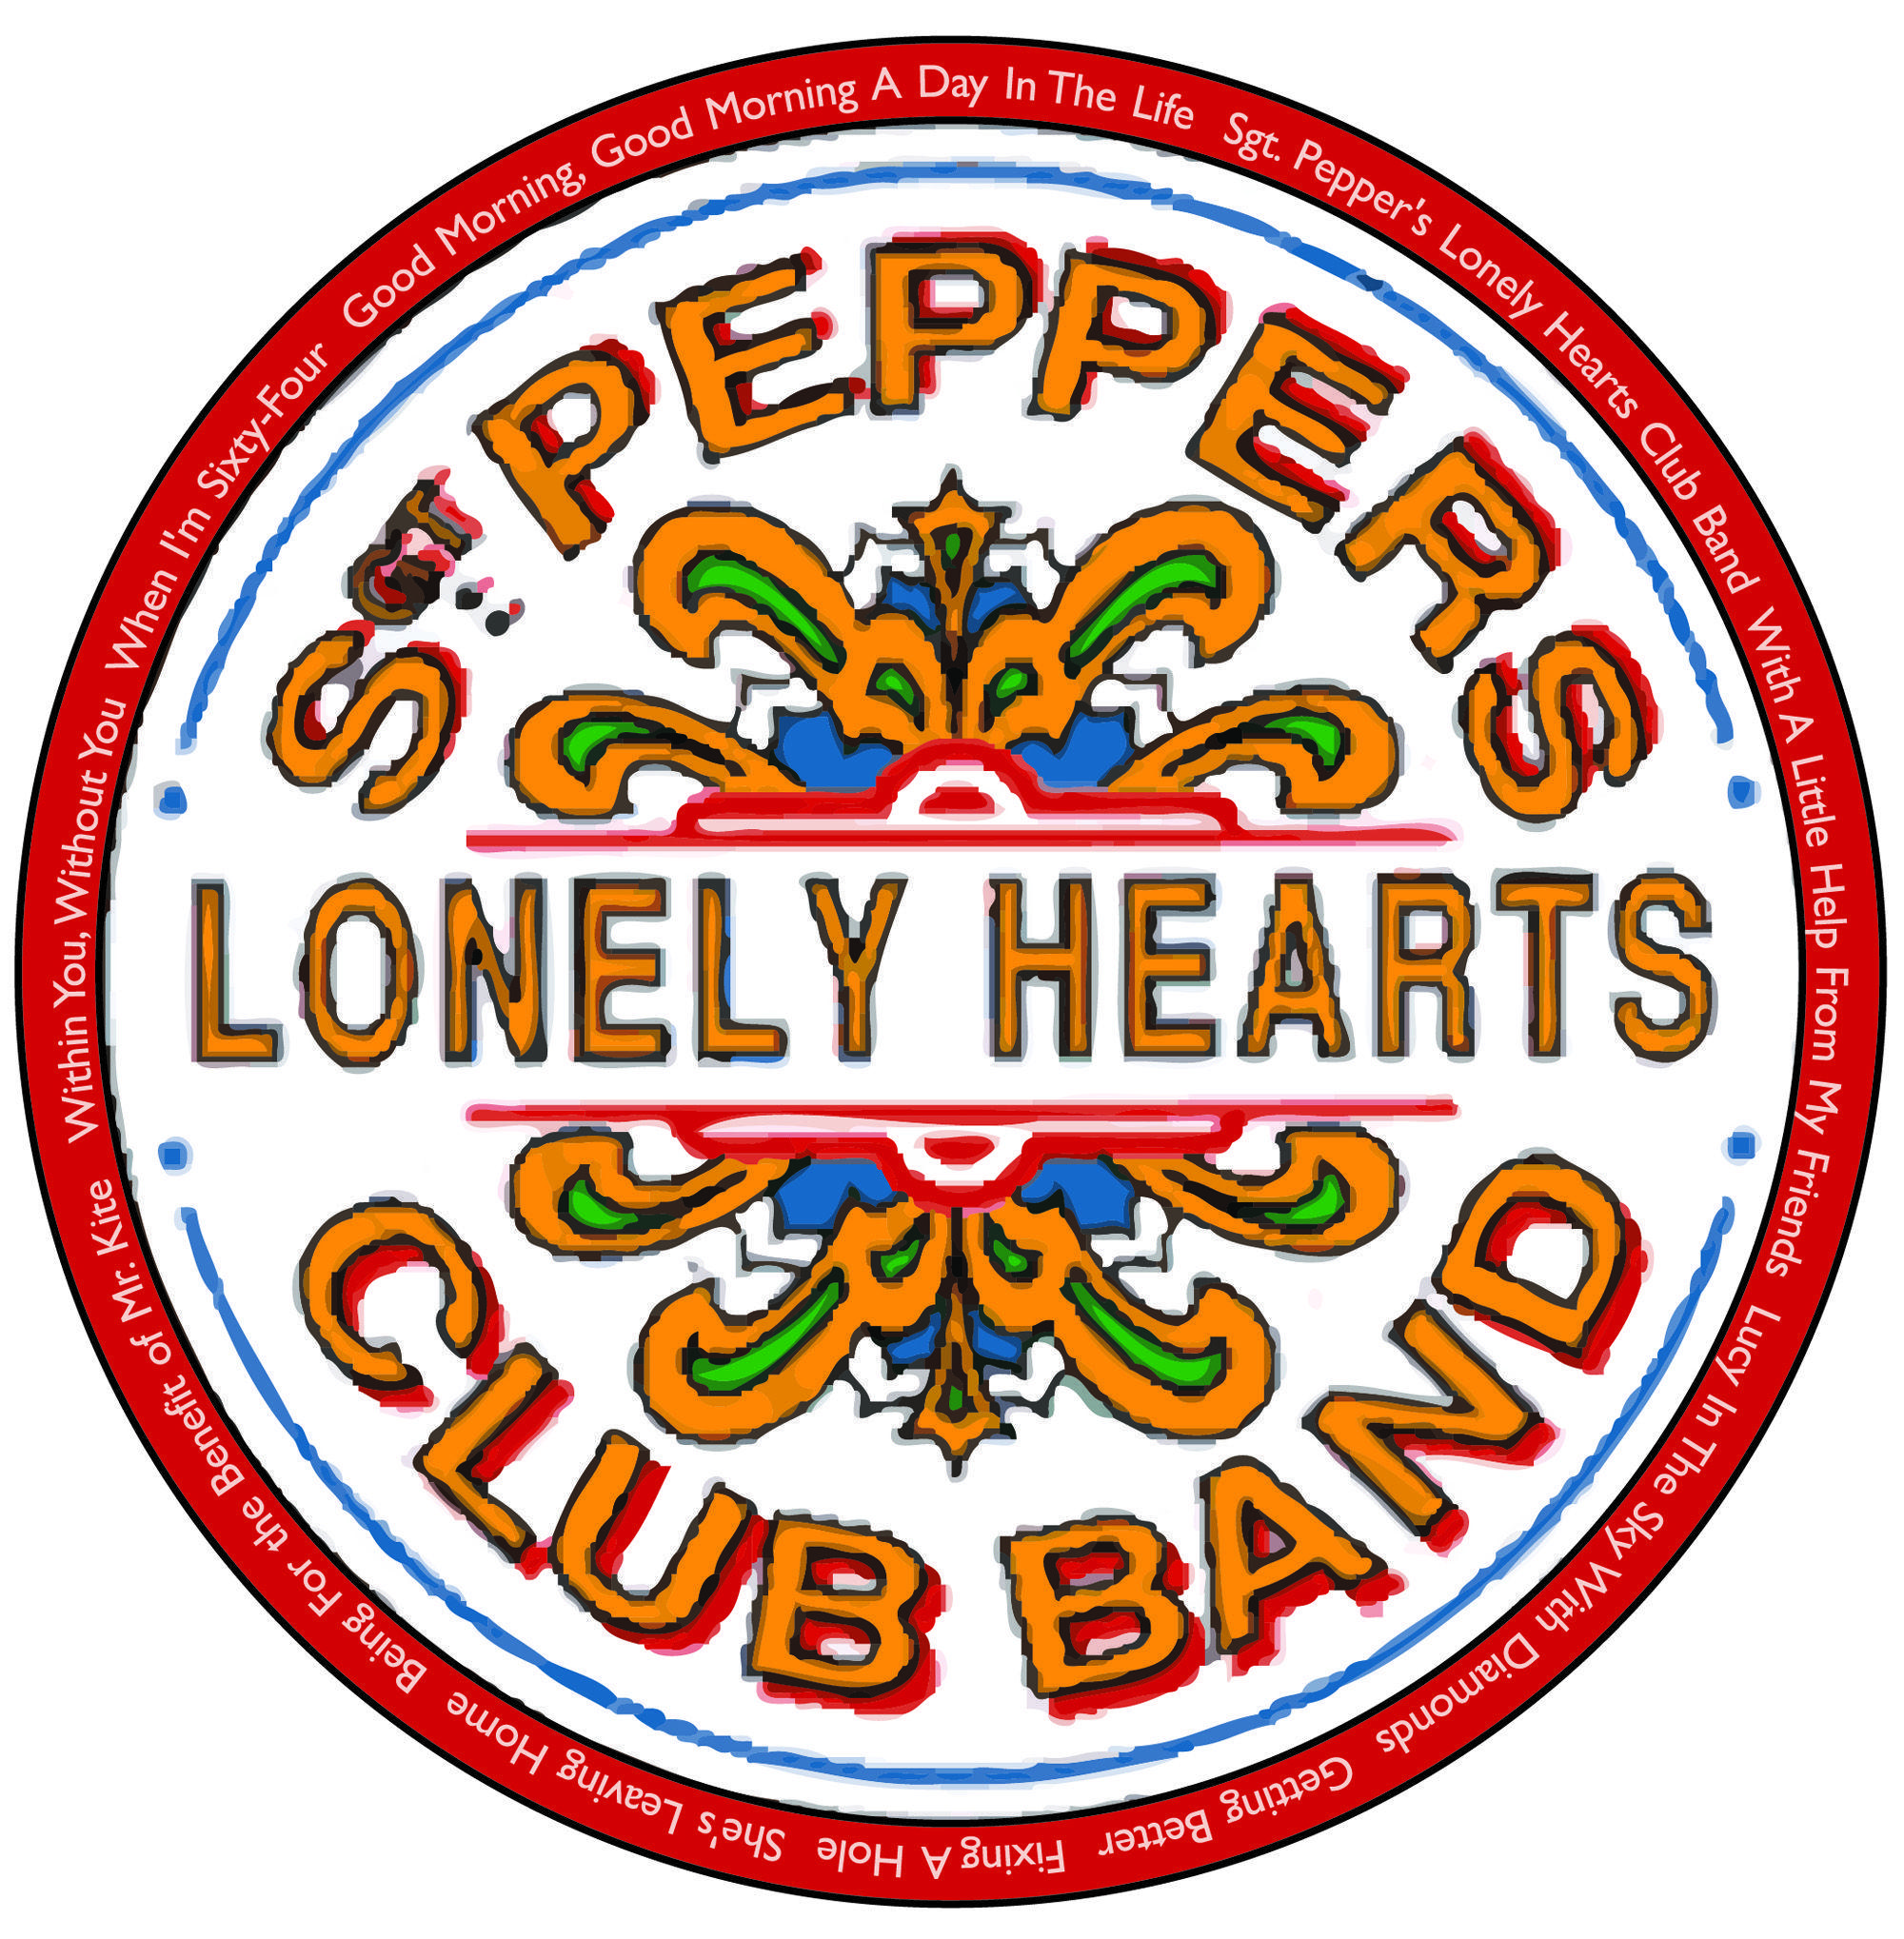 Heart Classic Rock Band Logo - Pin by rose robinette on The Beatles | The Beatles, Music, Band